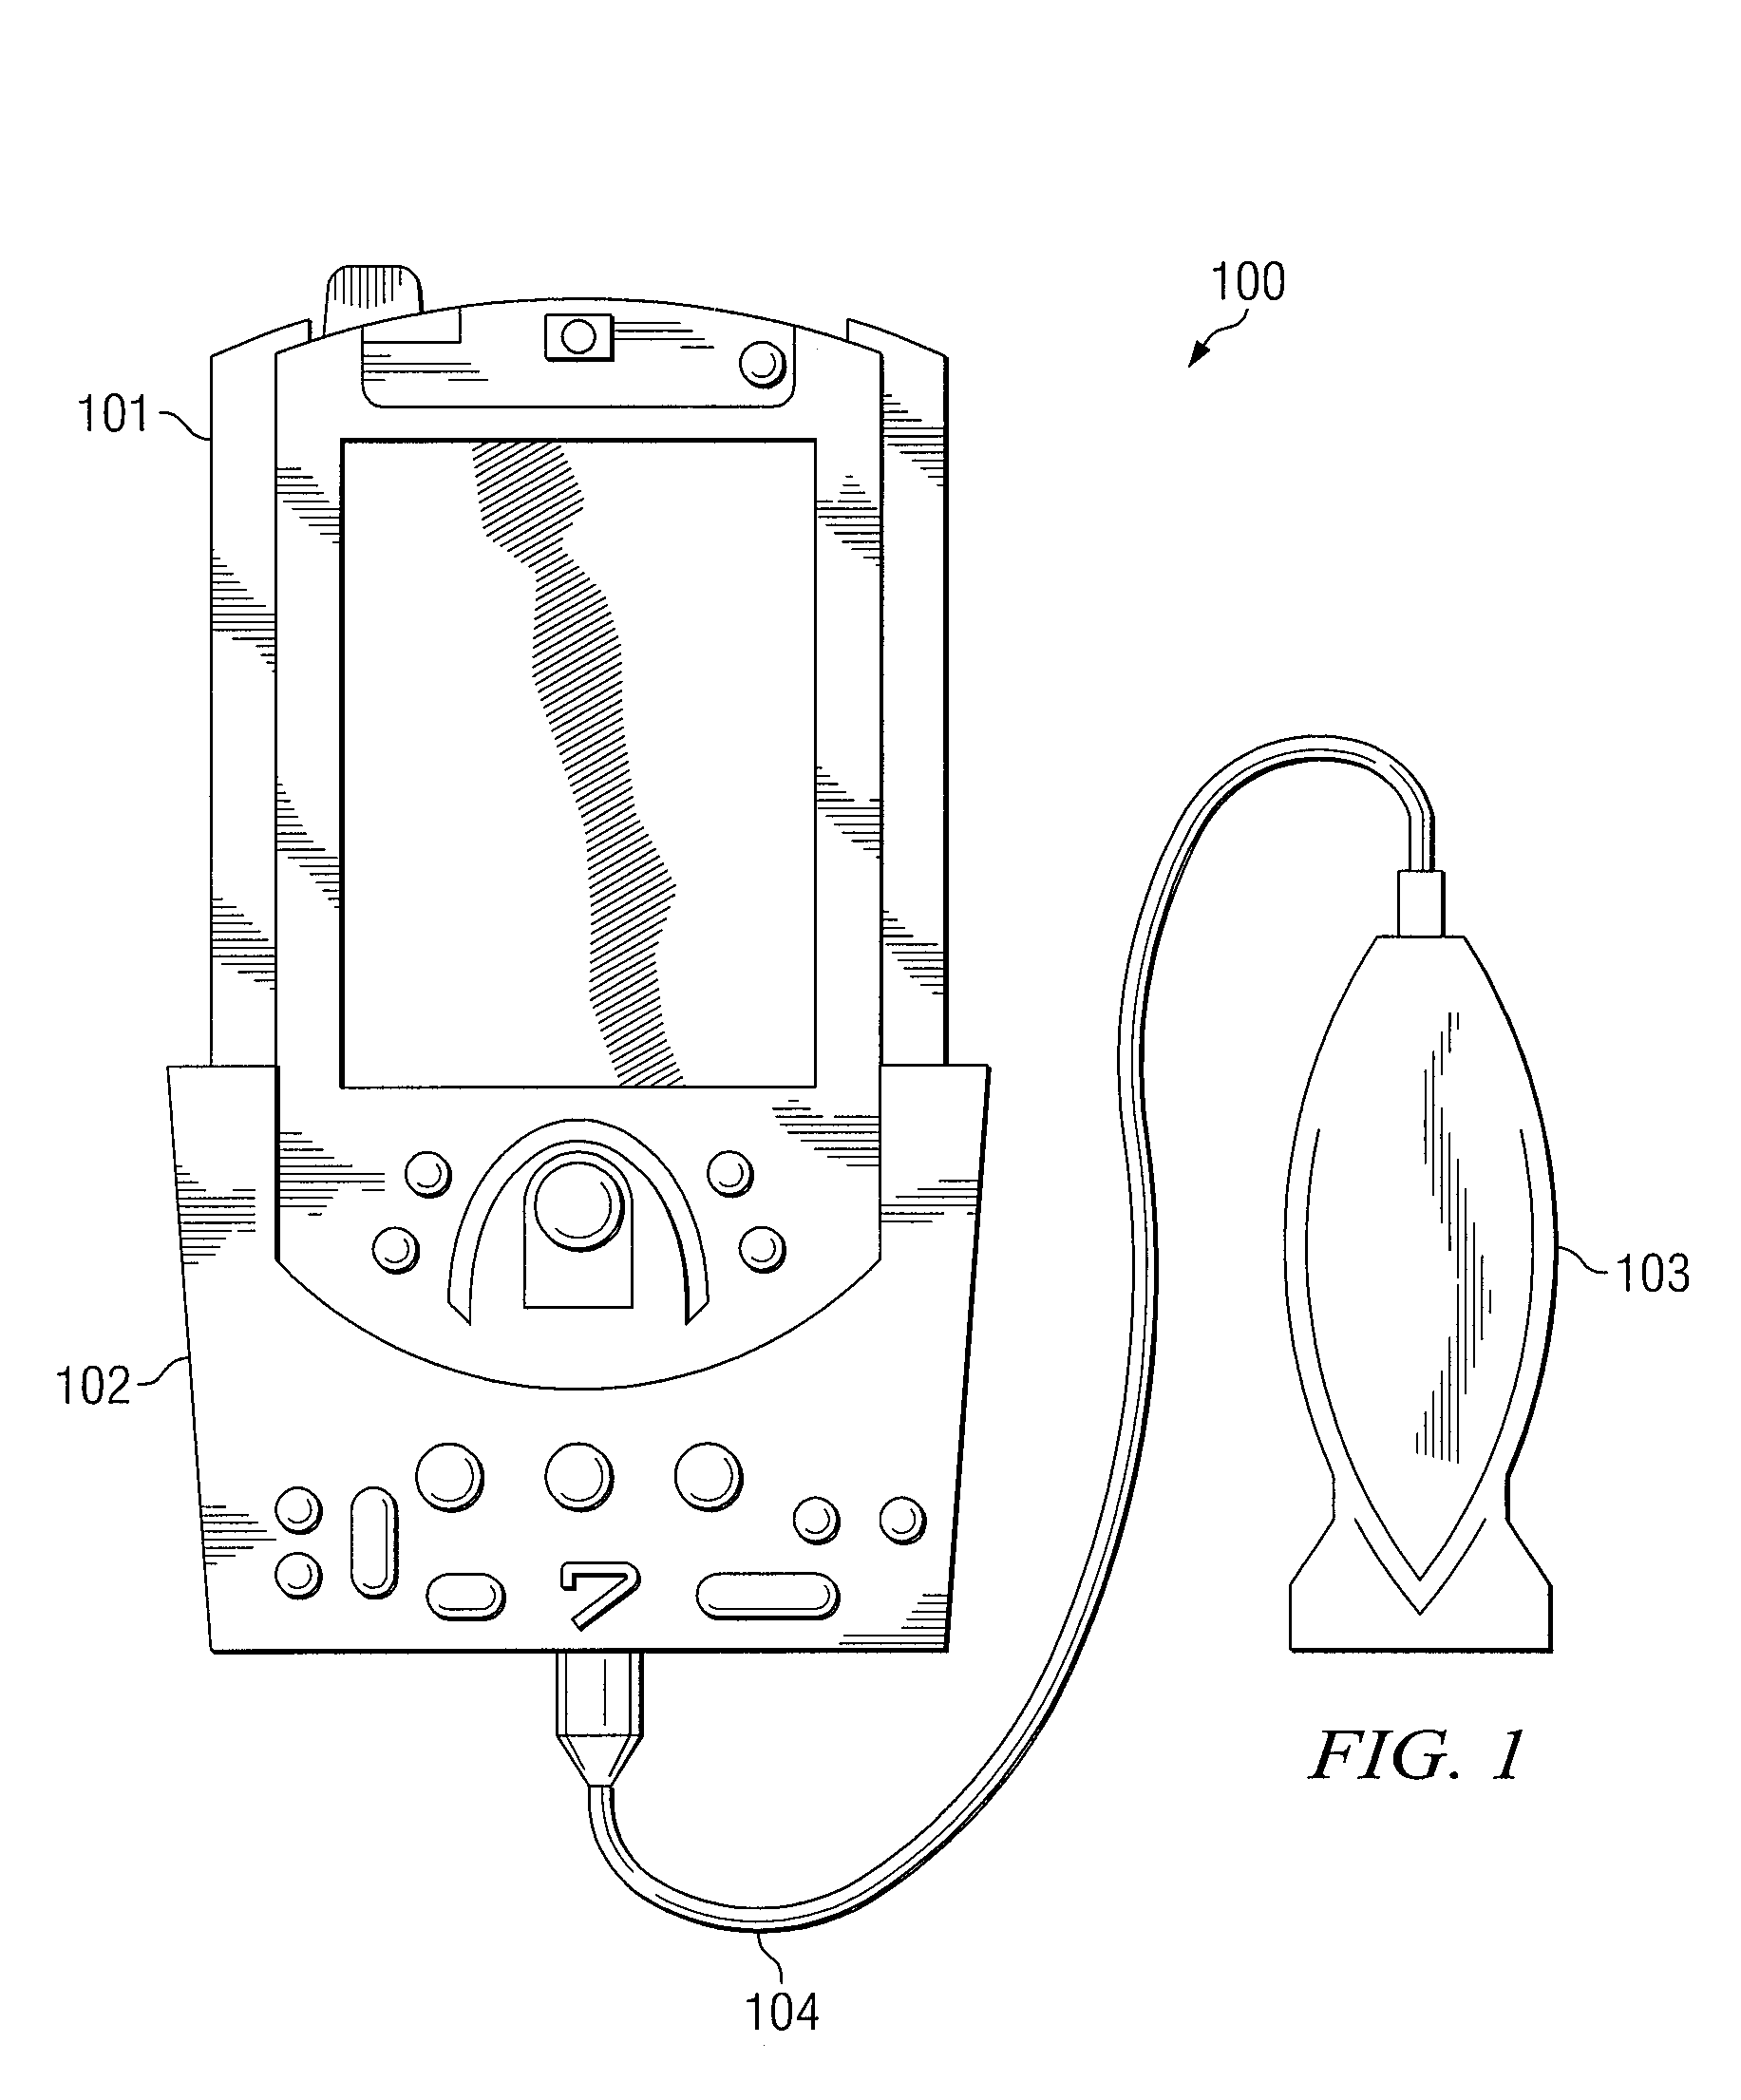 System and method supporting imaging and monitoring applications